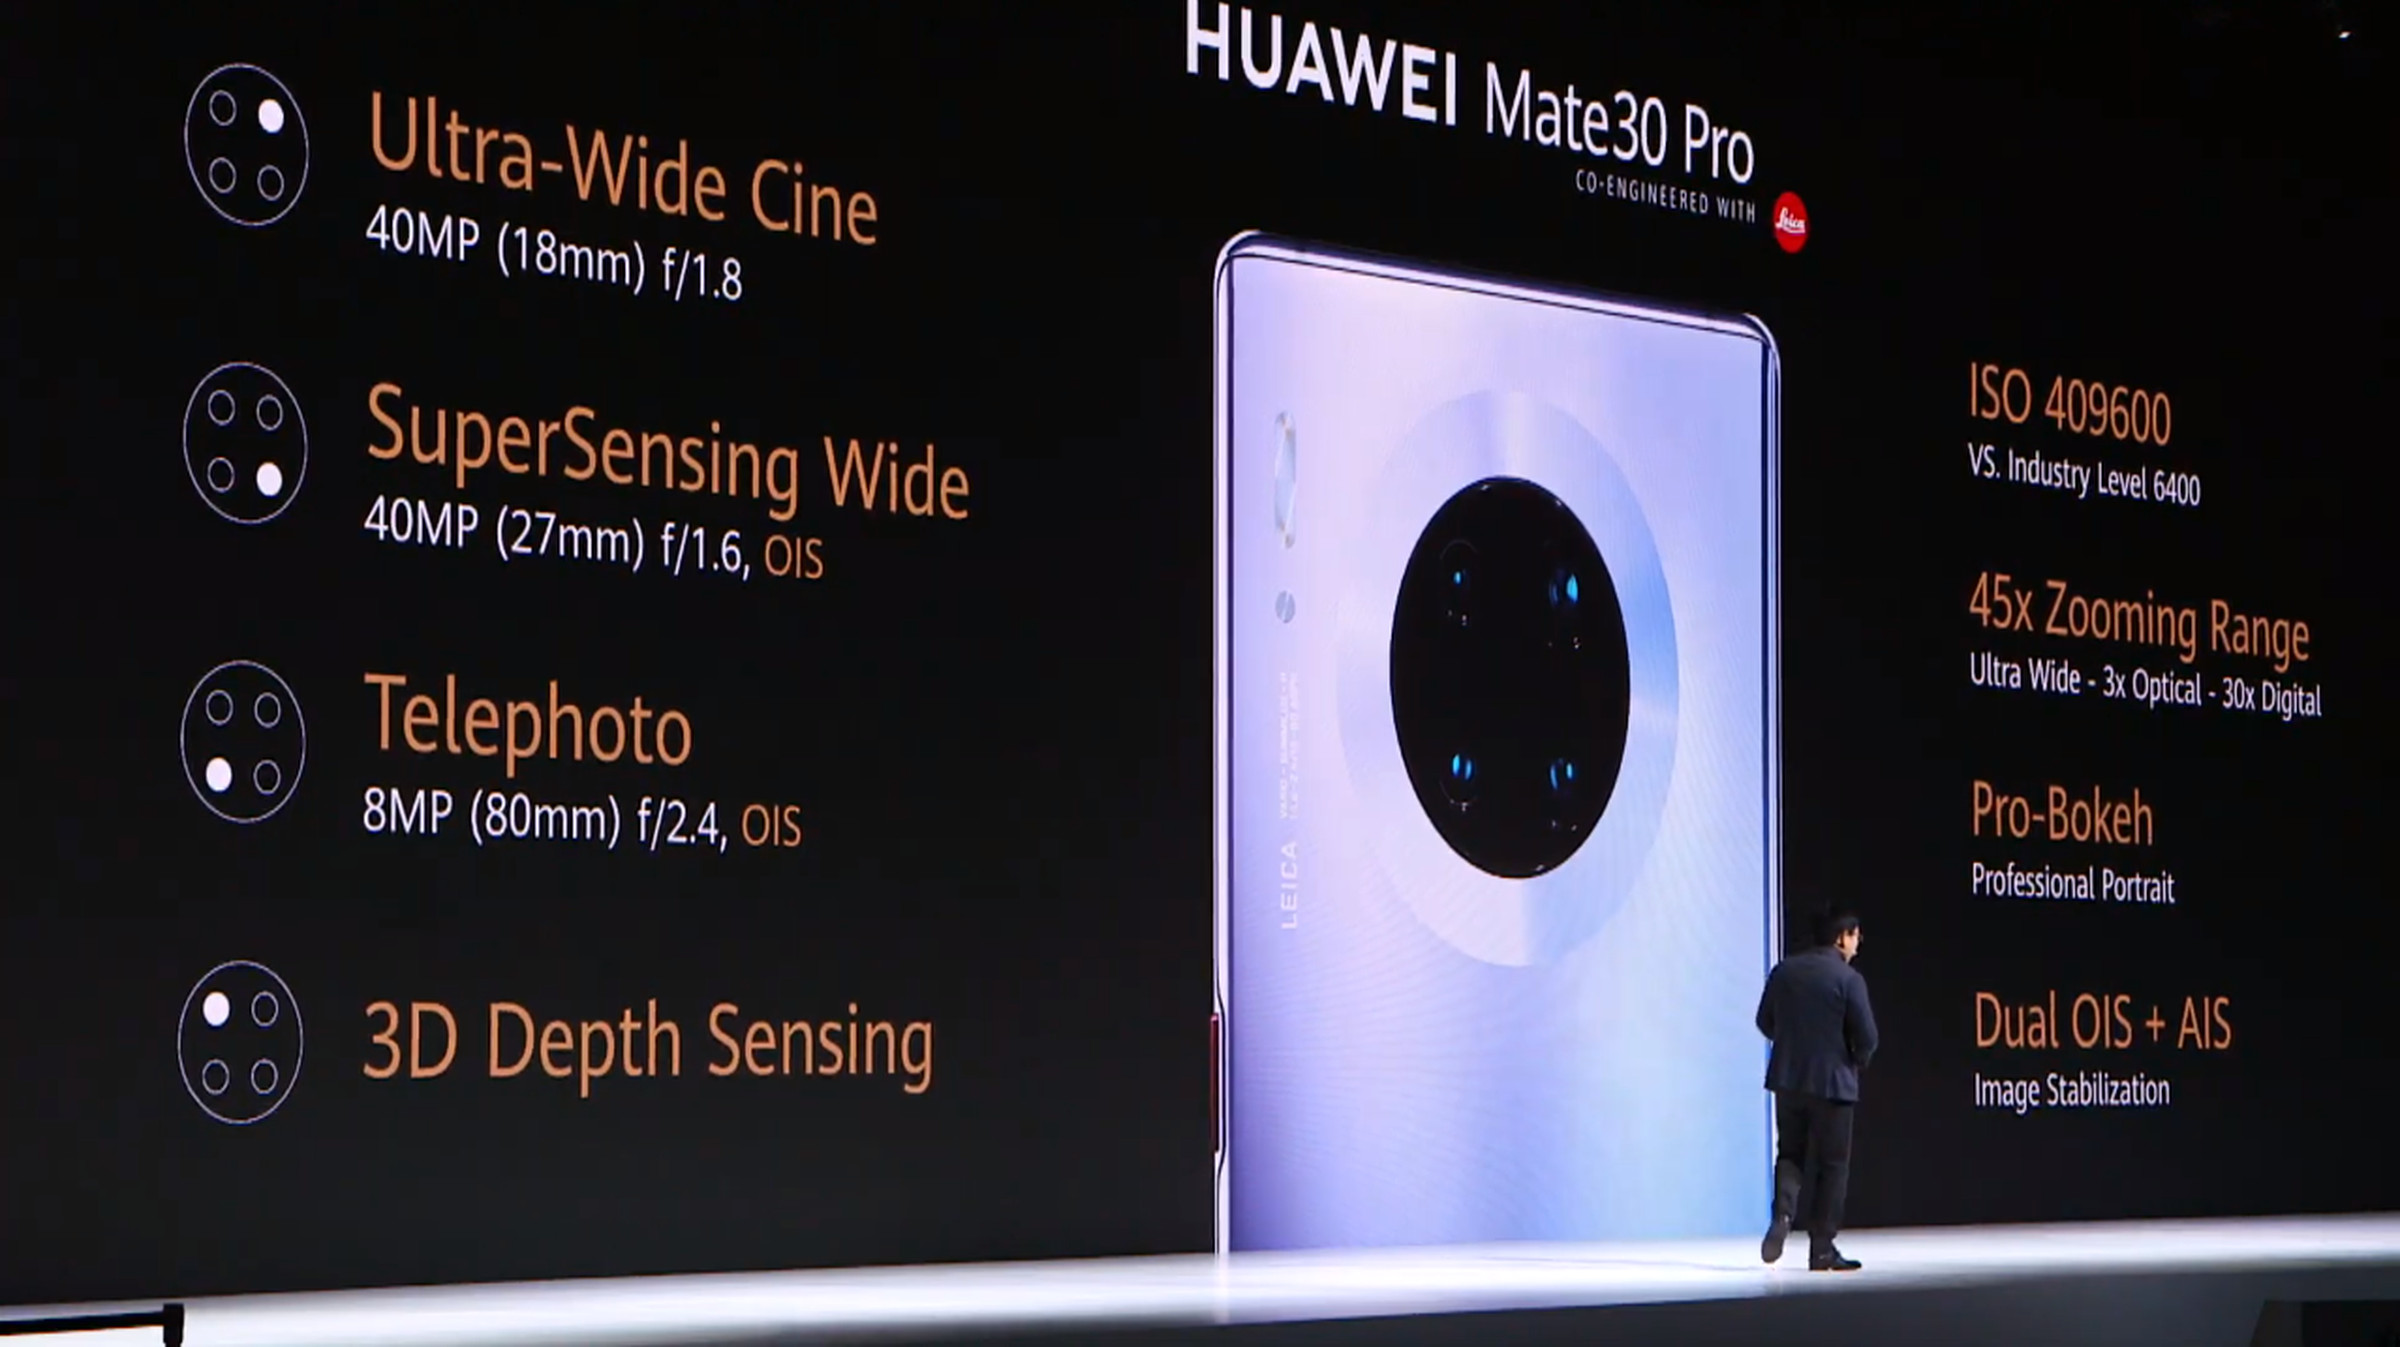 The Mate 30 Pro upgrades the resolution of the ultra wide-angle camera and adds a 3D depth sensor.